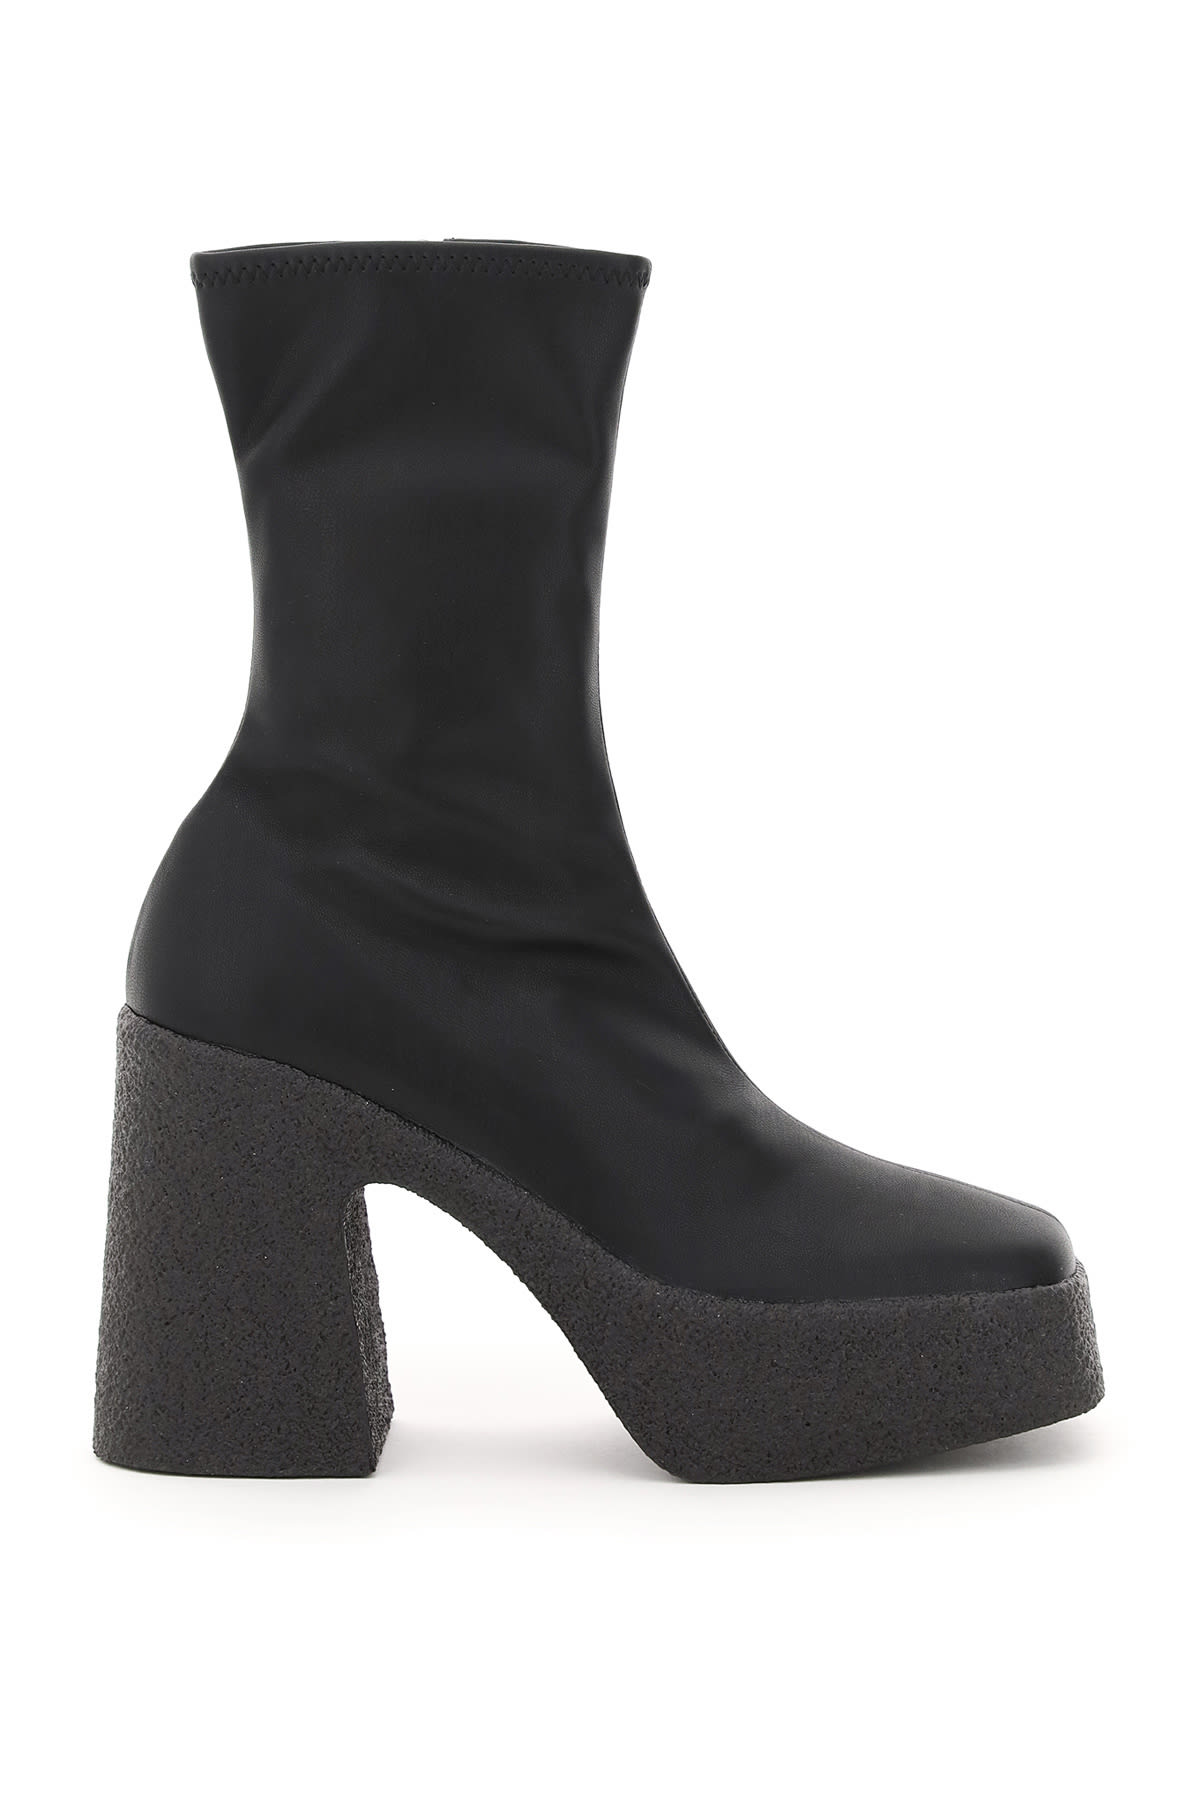 Buy Stella McCartney Thick Heel Stretch Boots online, shop Stella McCartney shoes with free shipping